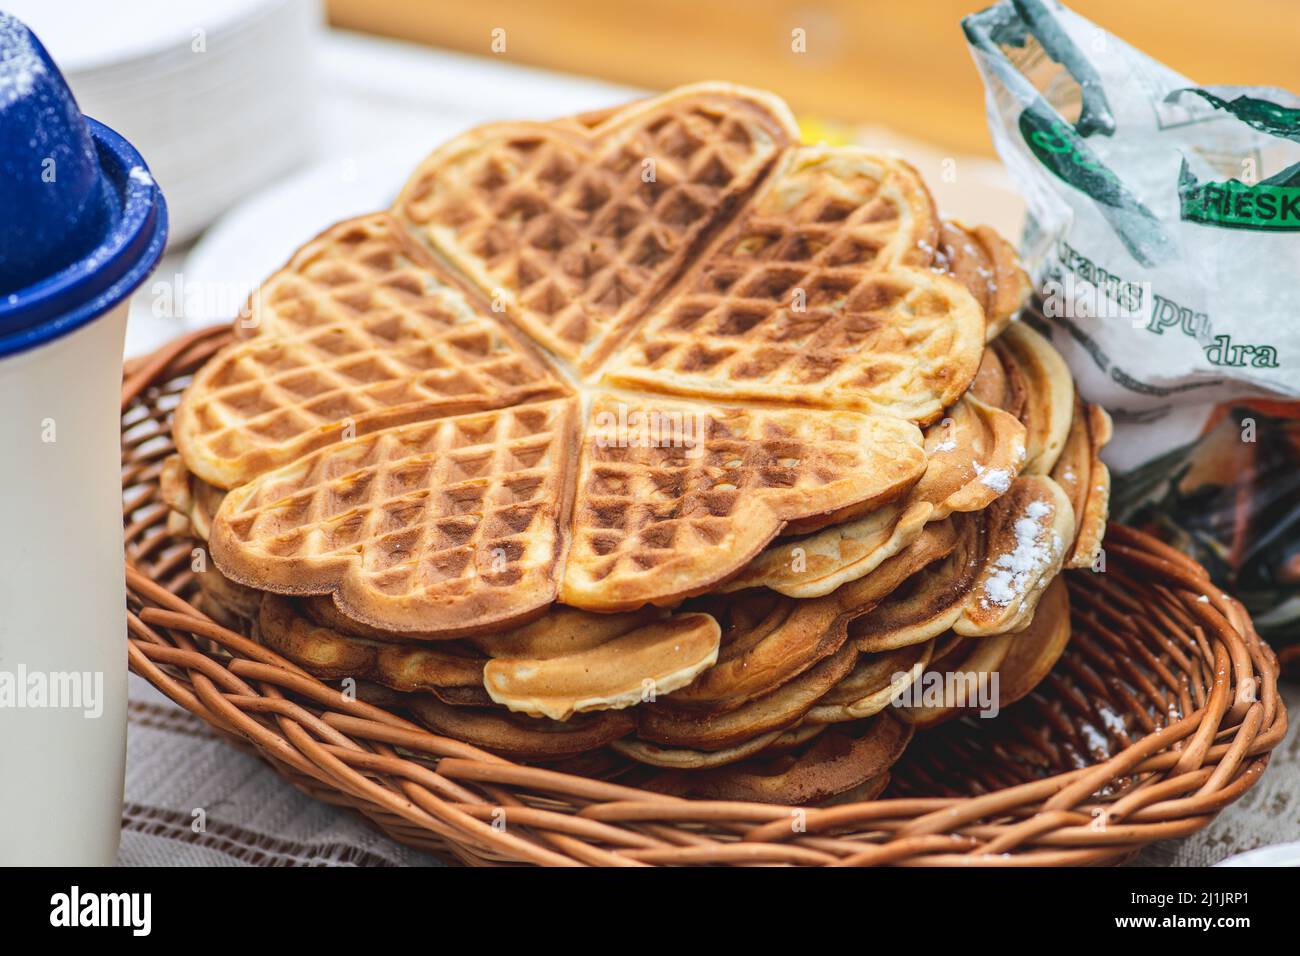 Waffle or waffles in a wicker basket, dish made from leavened batter or dough that is cooked between two plates that are patterned Stock Photo